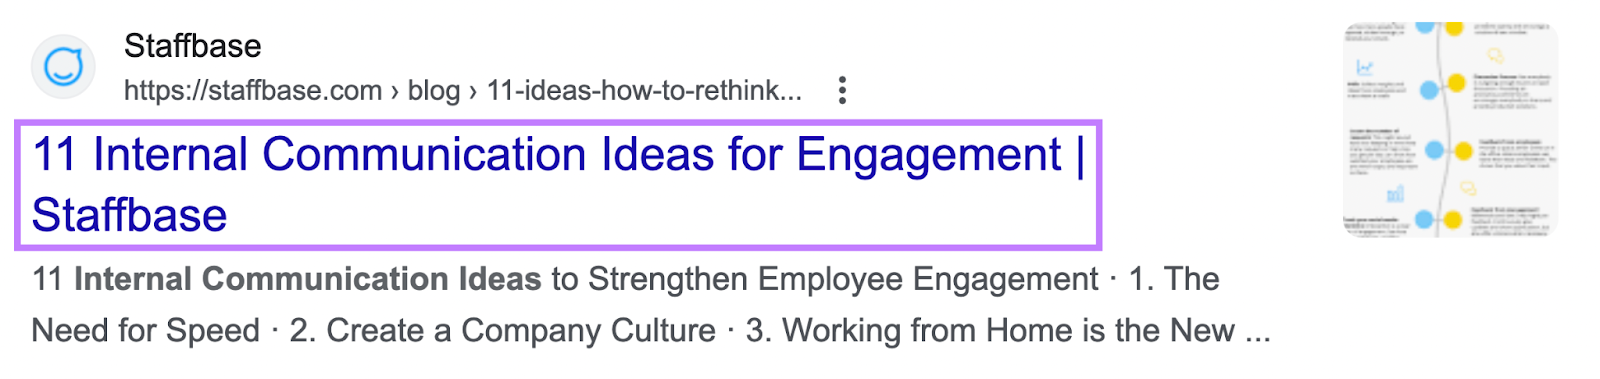 Staffbase' article title "11 Internal Communication Ideas for Engagement" on SERP